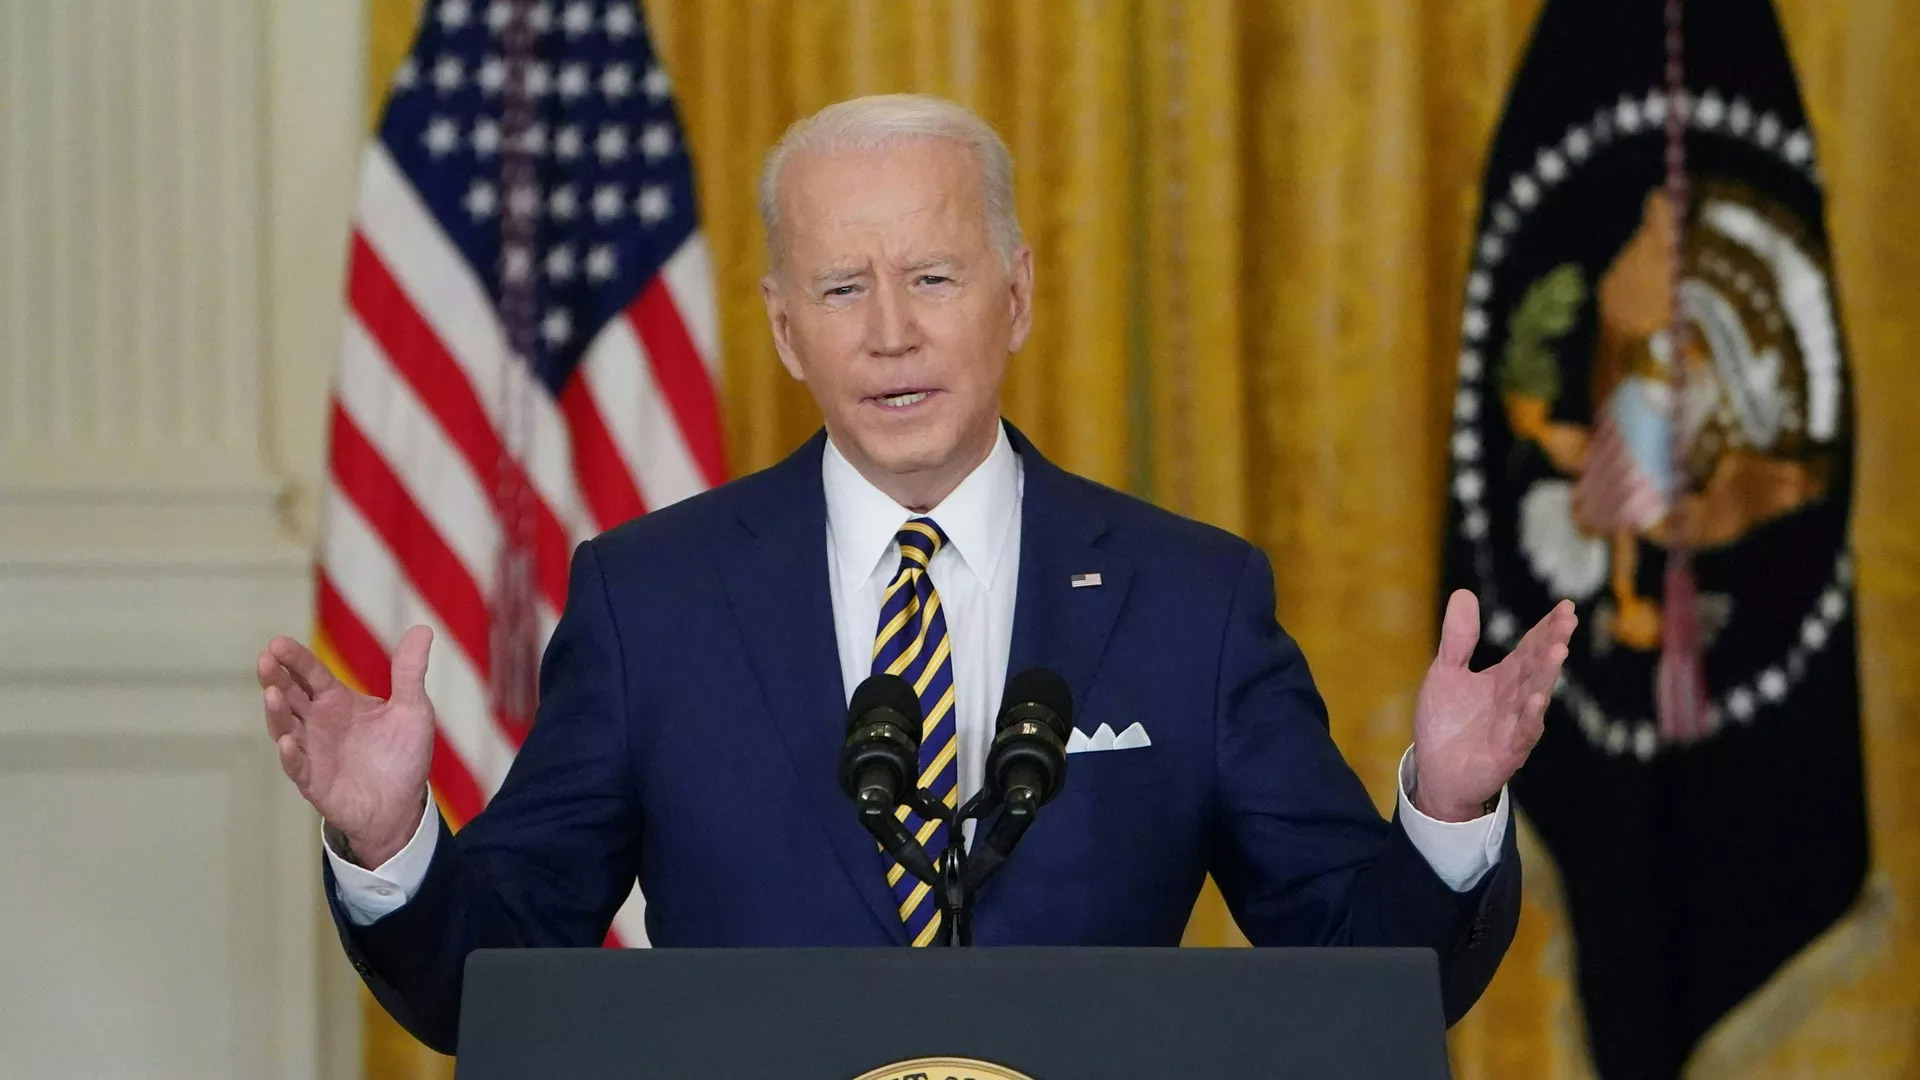 McCarthy reacts to classified documents discovered from Biden’s time as VP: Dems ‘overplayed their hand’